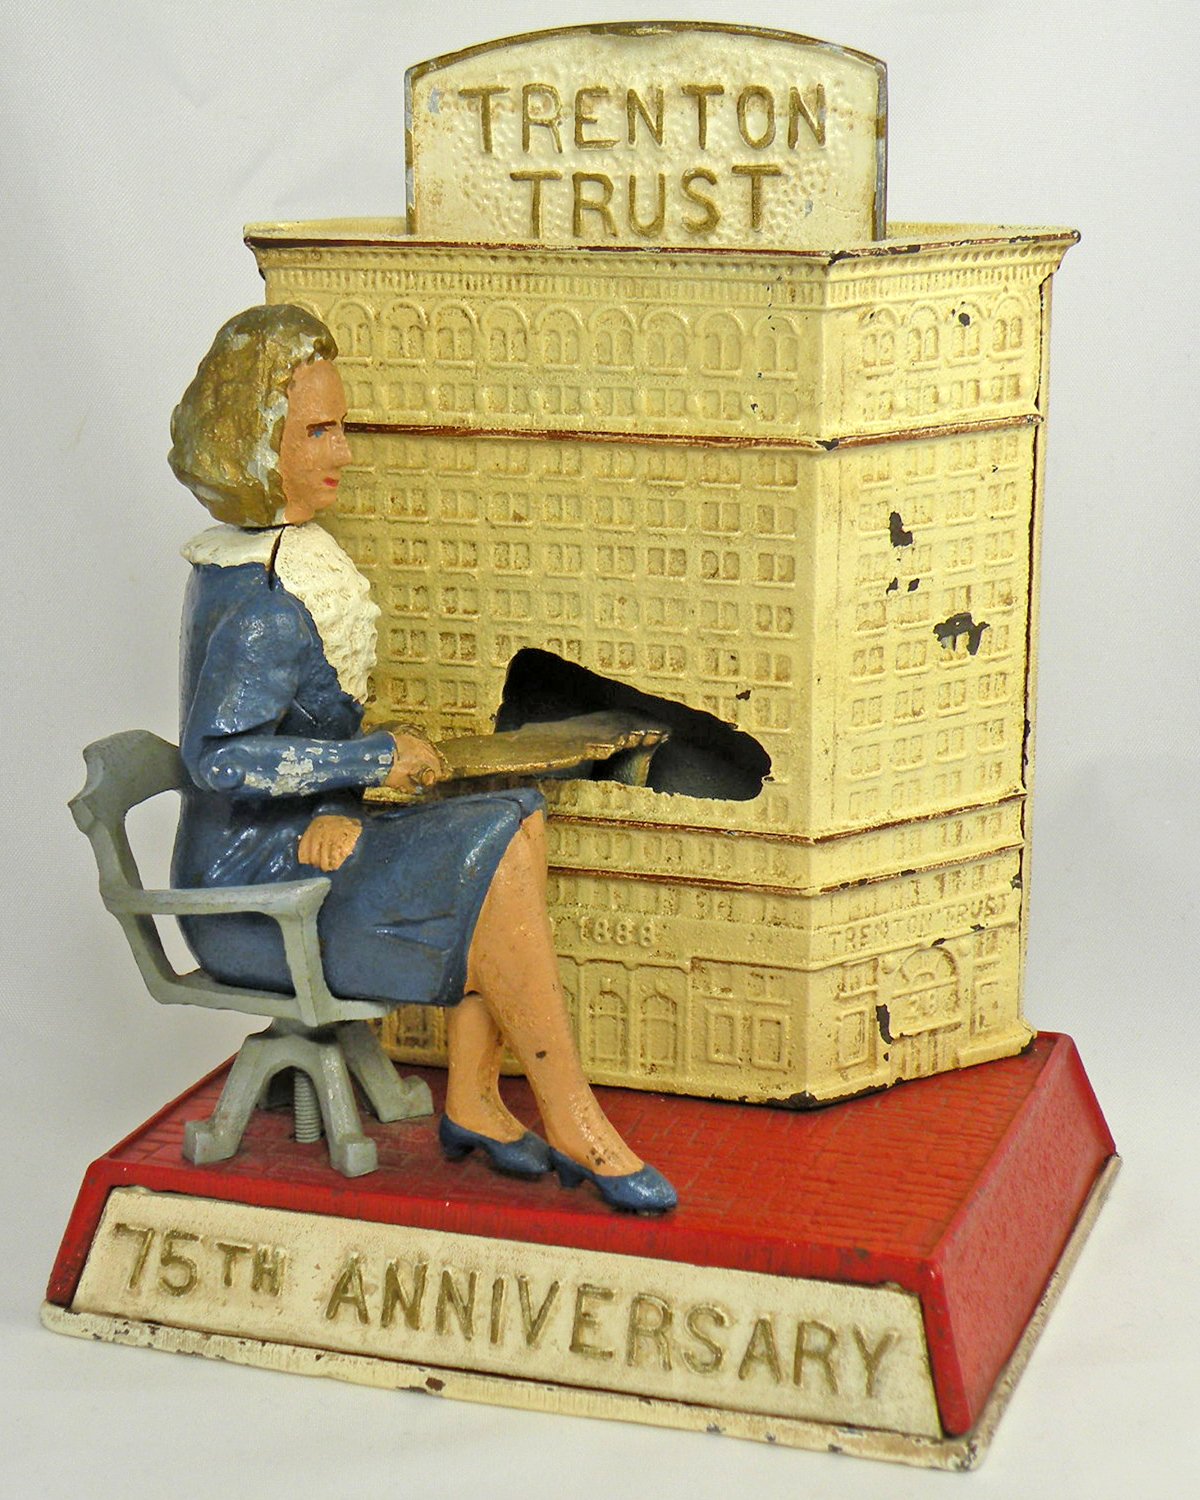 Color picture of a coin bank featuring a woman in a blue suit seated next to a building with a Trenton Trust sign. At the bottom is a sign saying the bank was made for the bank’s 75th anniversary.